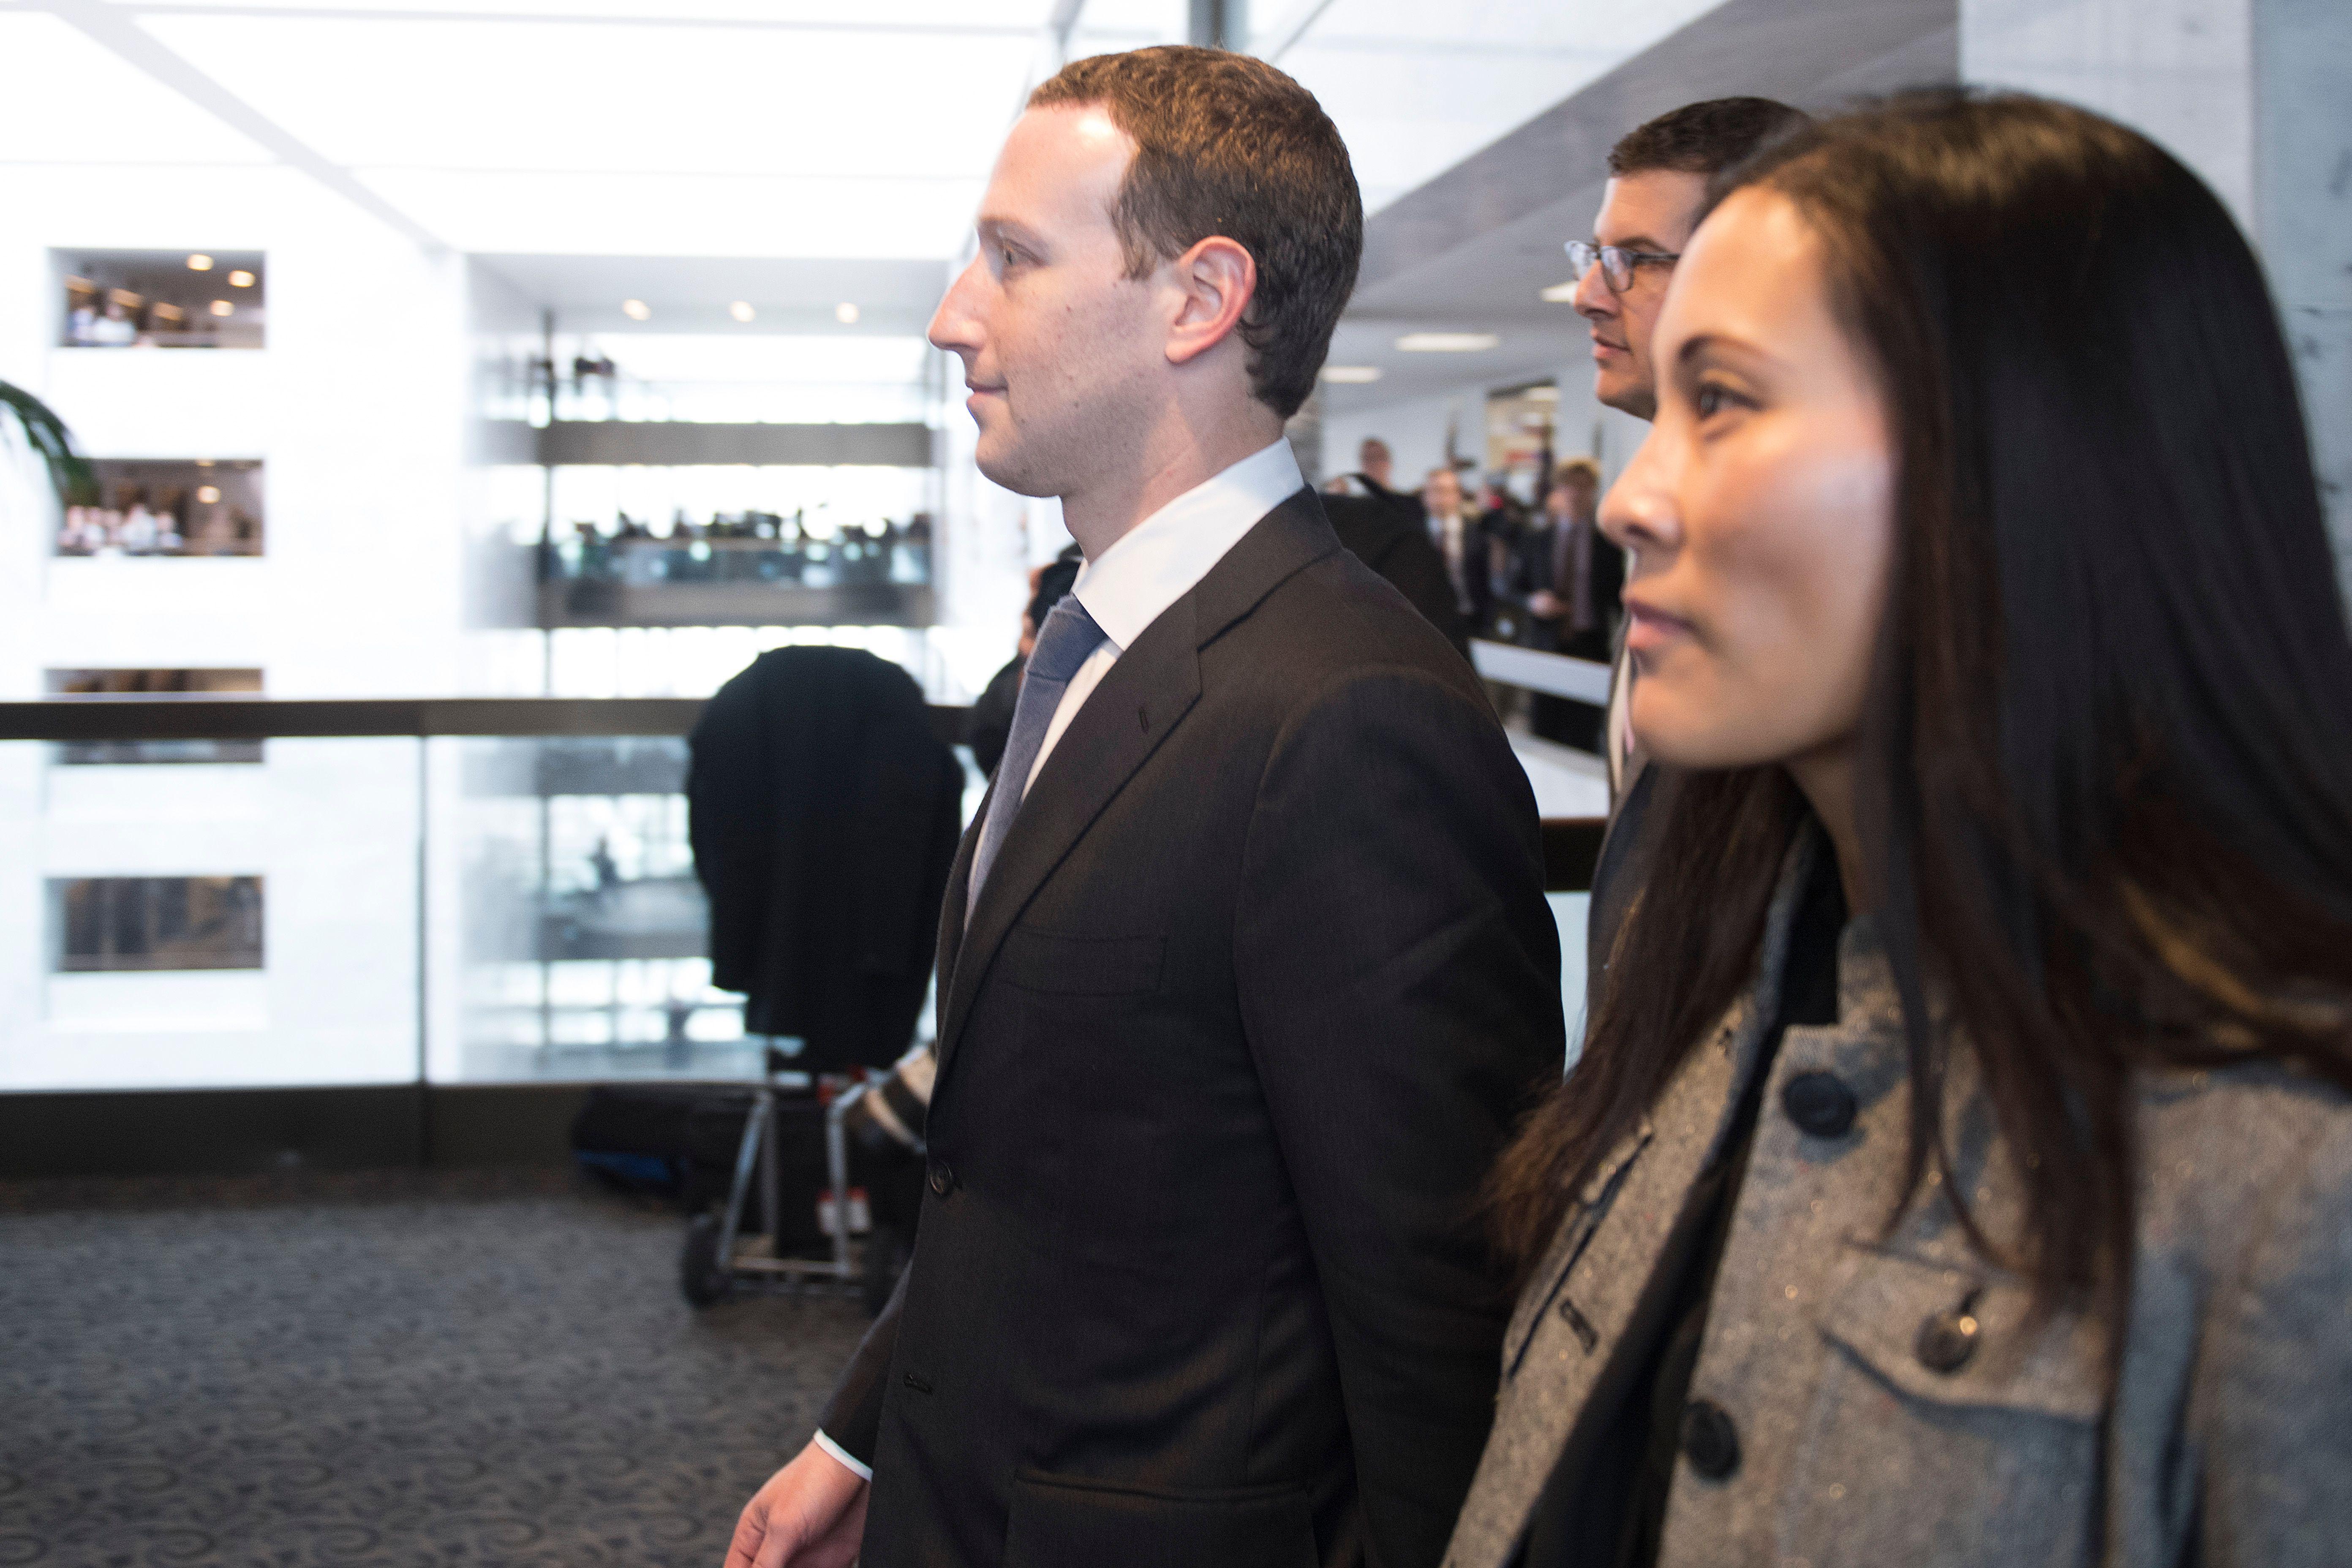 Mark Zuckerberg and Priscilla Chan (R) depart US Senator Bill Nelson's, D- Florida, office on Capitol Hill in Washington, DC, on April 9, 2018.Embattled Facebook chief Mark Zuckerberg has placed the blame for security lapses at the world's largest social network squarely on himself as he girded Monday for appearances this week before angry lawmakers.In prepared remarks released by a congressional panel, Zuckerberg admitted he was too idealistic and failed to grasp how the platform -- used by two billion people -- could be abused and manipulated. 